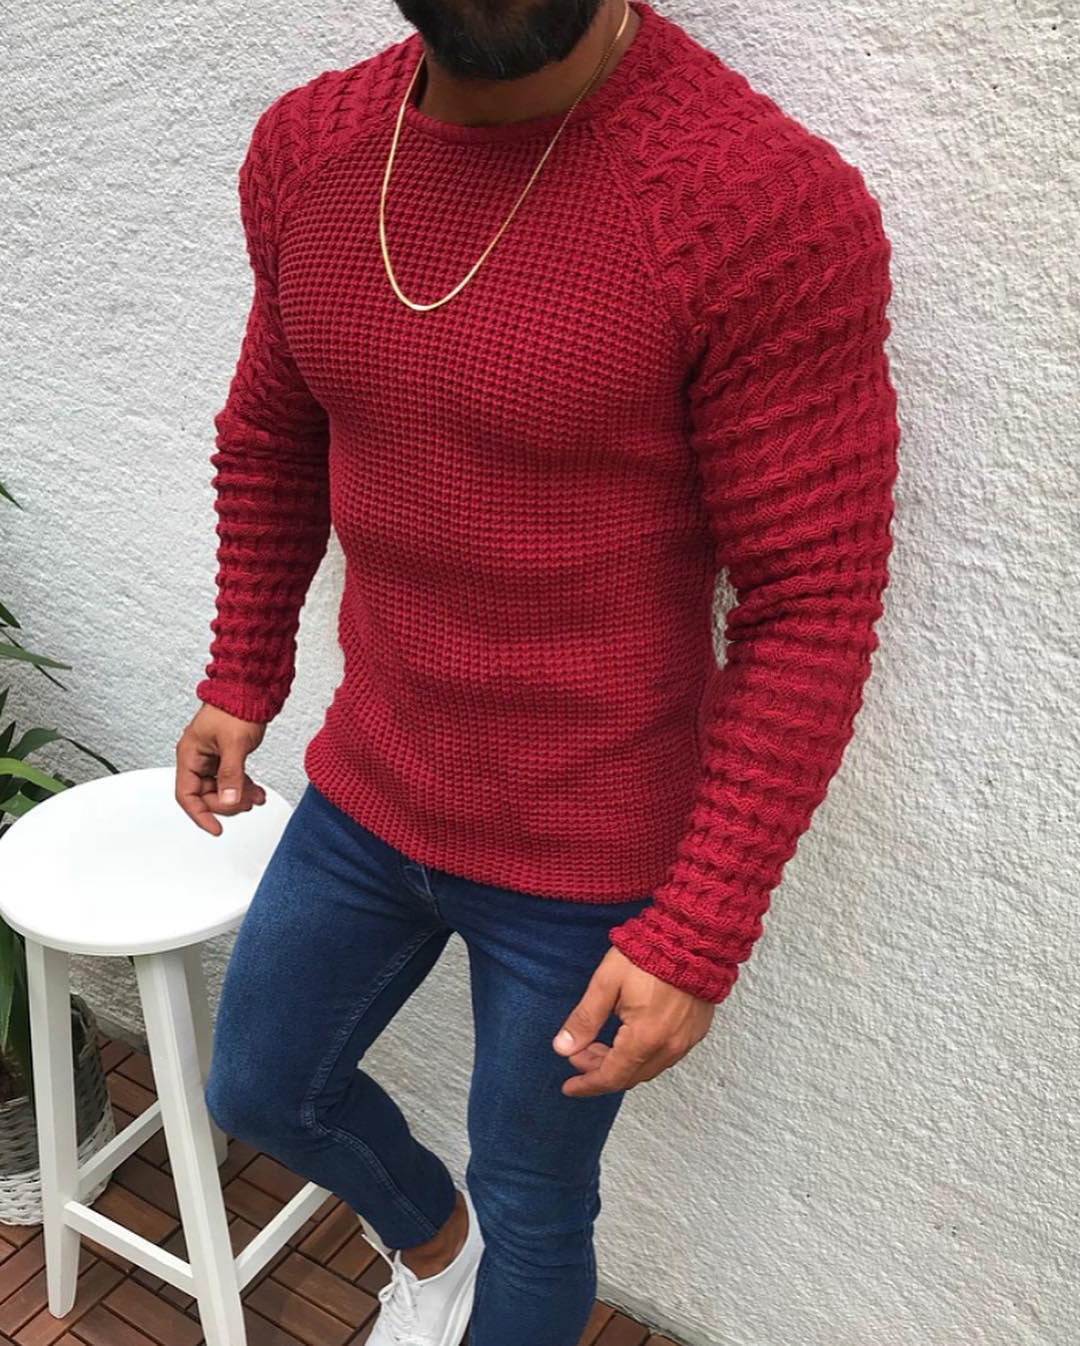 Hollow Crocheted Long-Sleeve Pullover Sweater - Forever Growth 